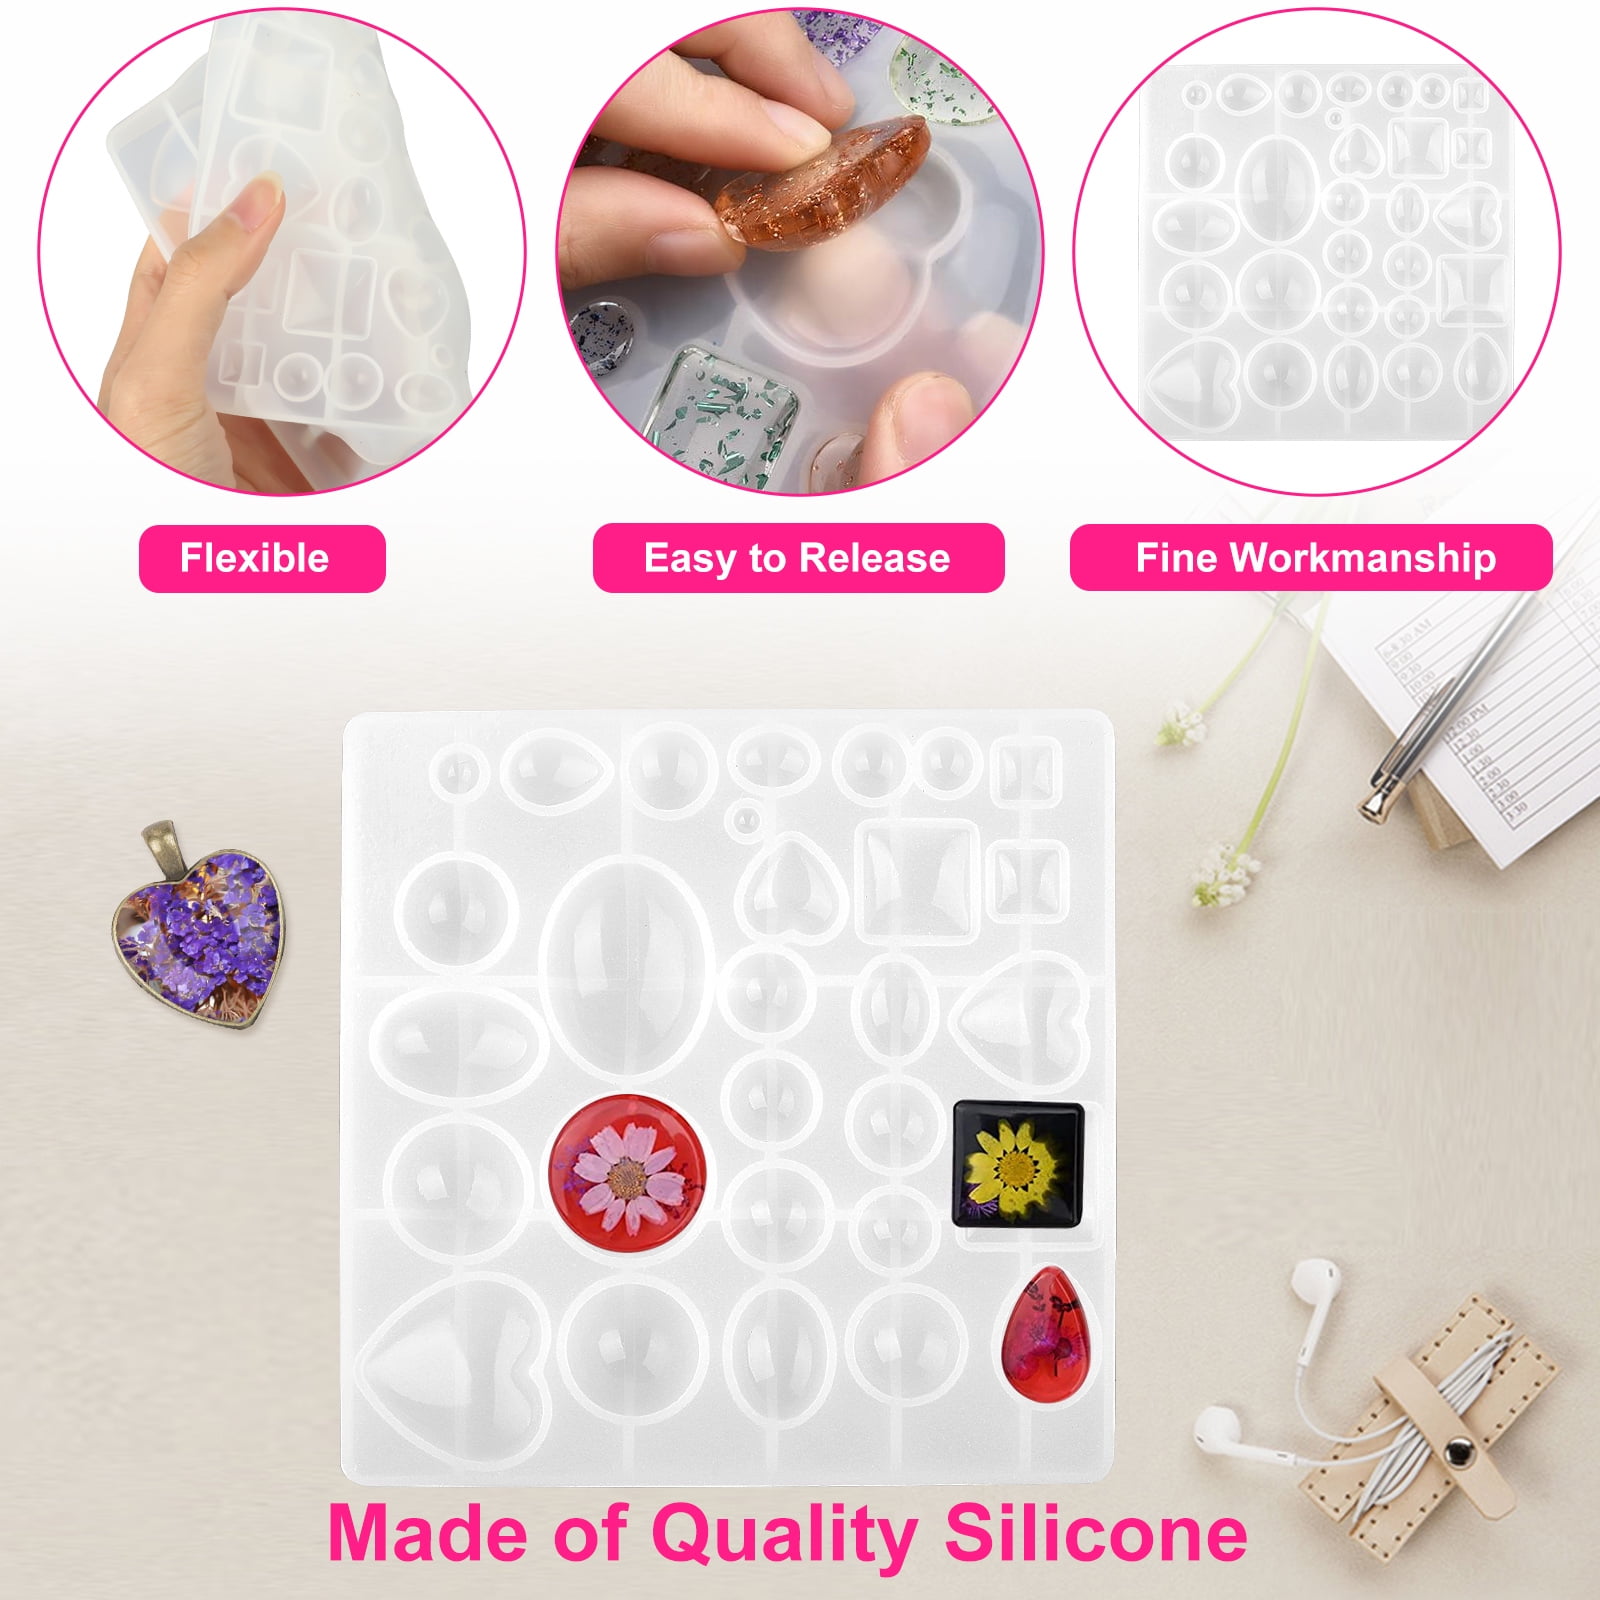 Bekecidi 142 Pieces Epoxy Resin Molds Earring Making Kit, Silicone Molds  for Resin Casting Resin Jewelry Mold with Earring Hooks Pendant Molds for  DIY